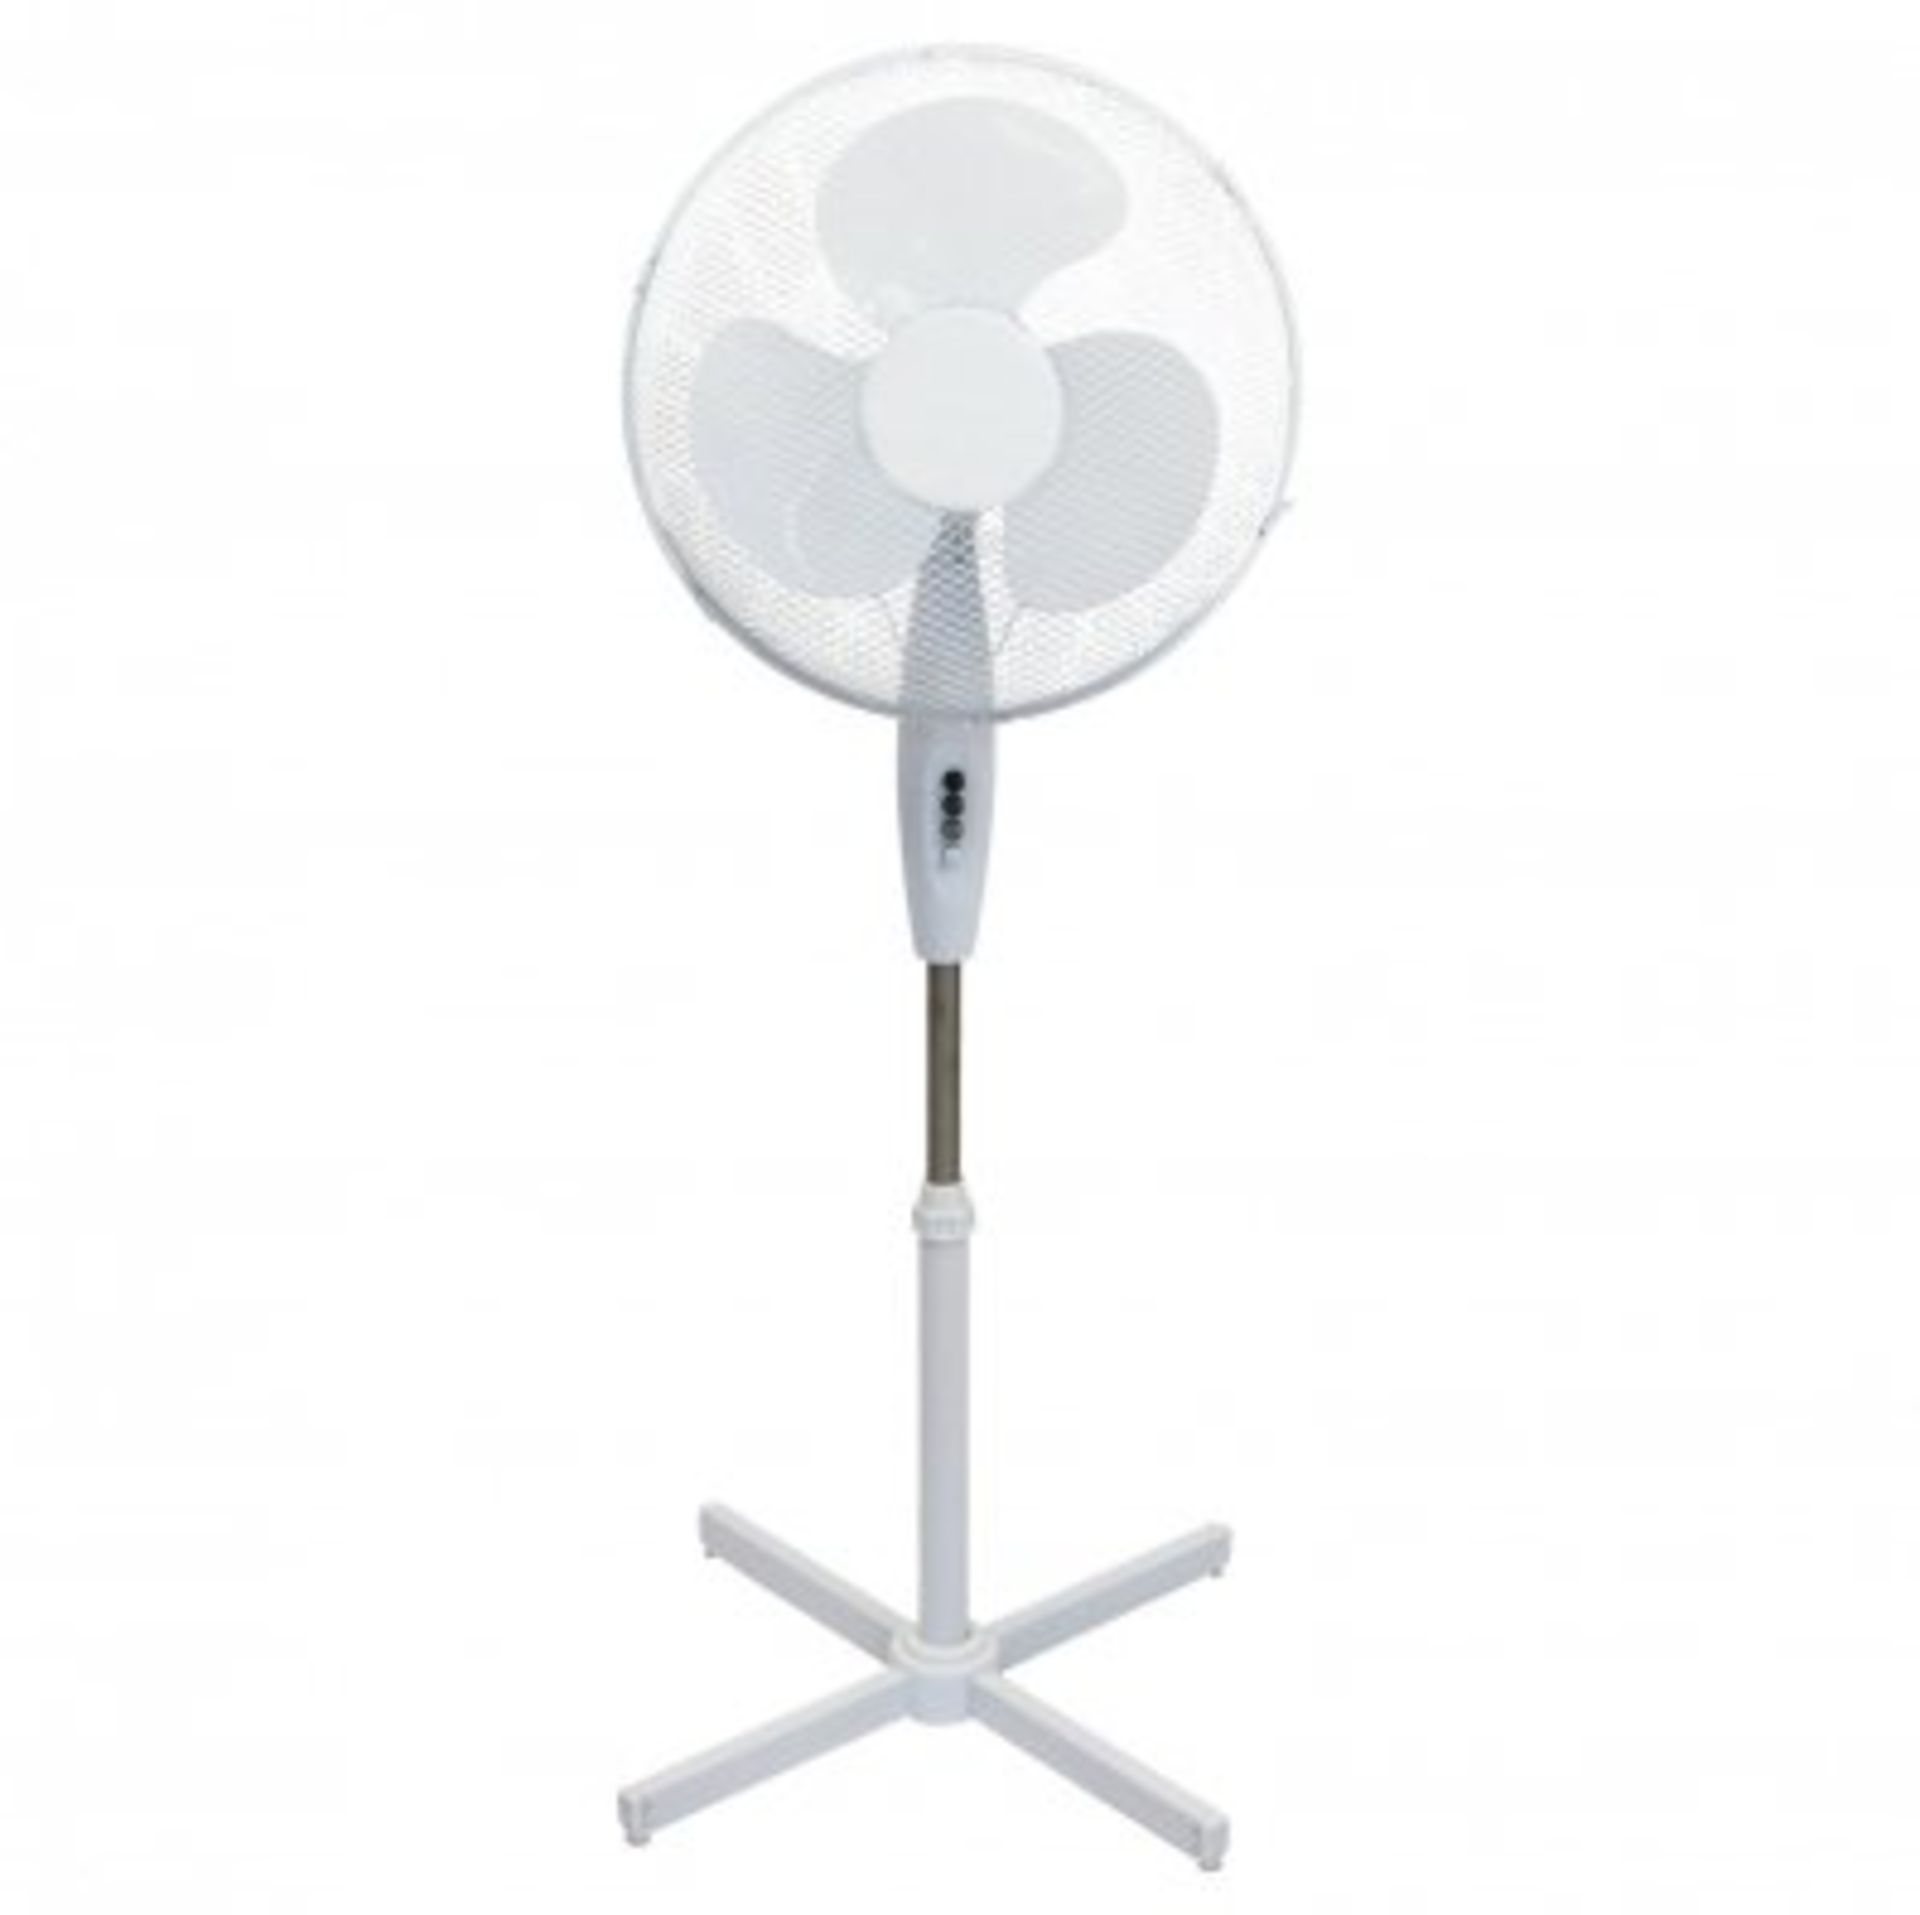 (RU258) 16" Oscillating Pedestal Electric Fan The fan head oscillates and tilts which...